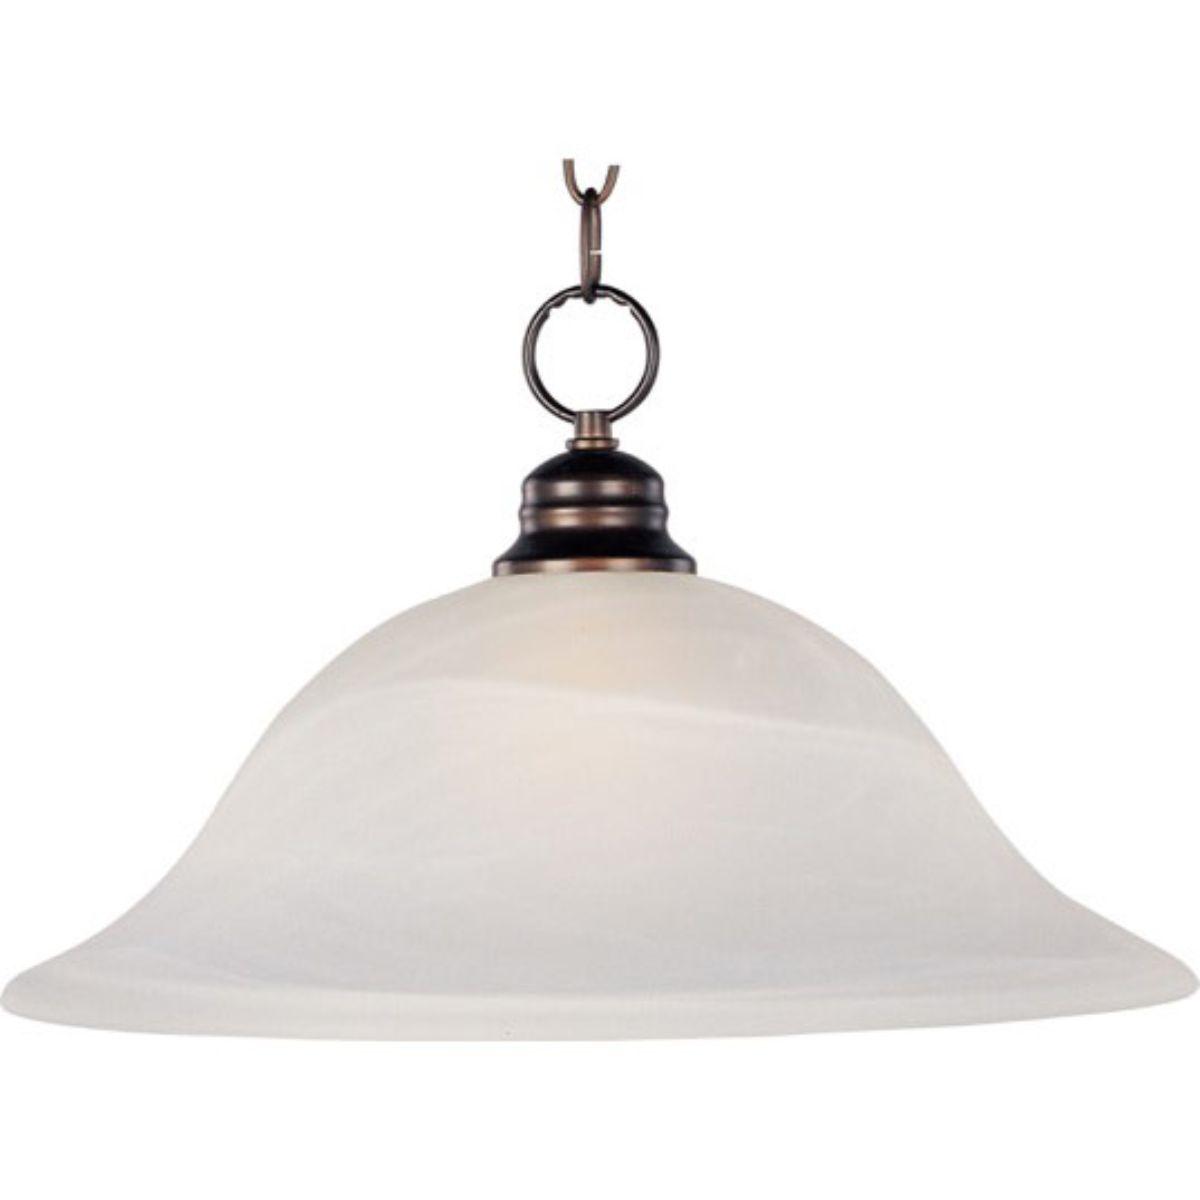 Essentials-9106x 16 in. Pendant Light with Marble Glass